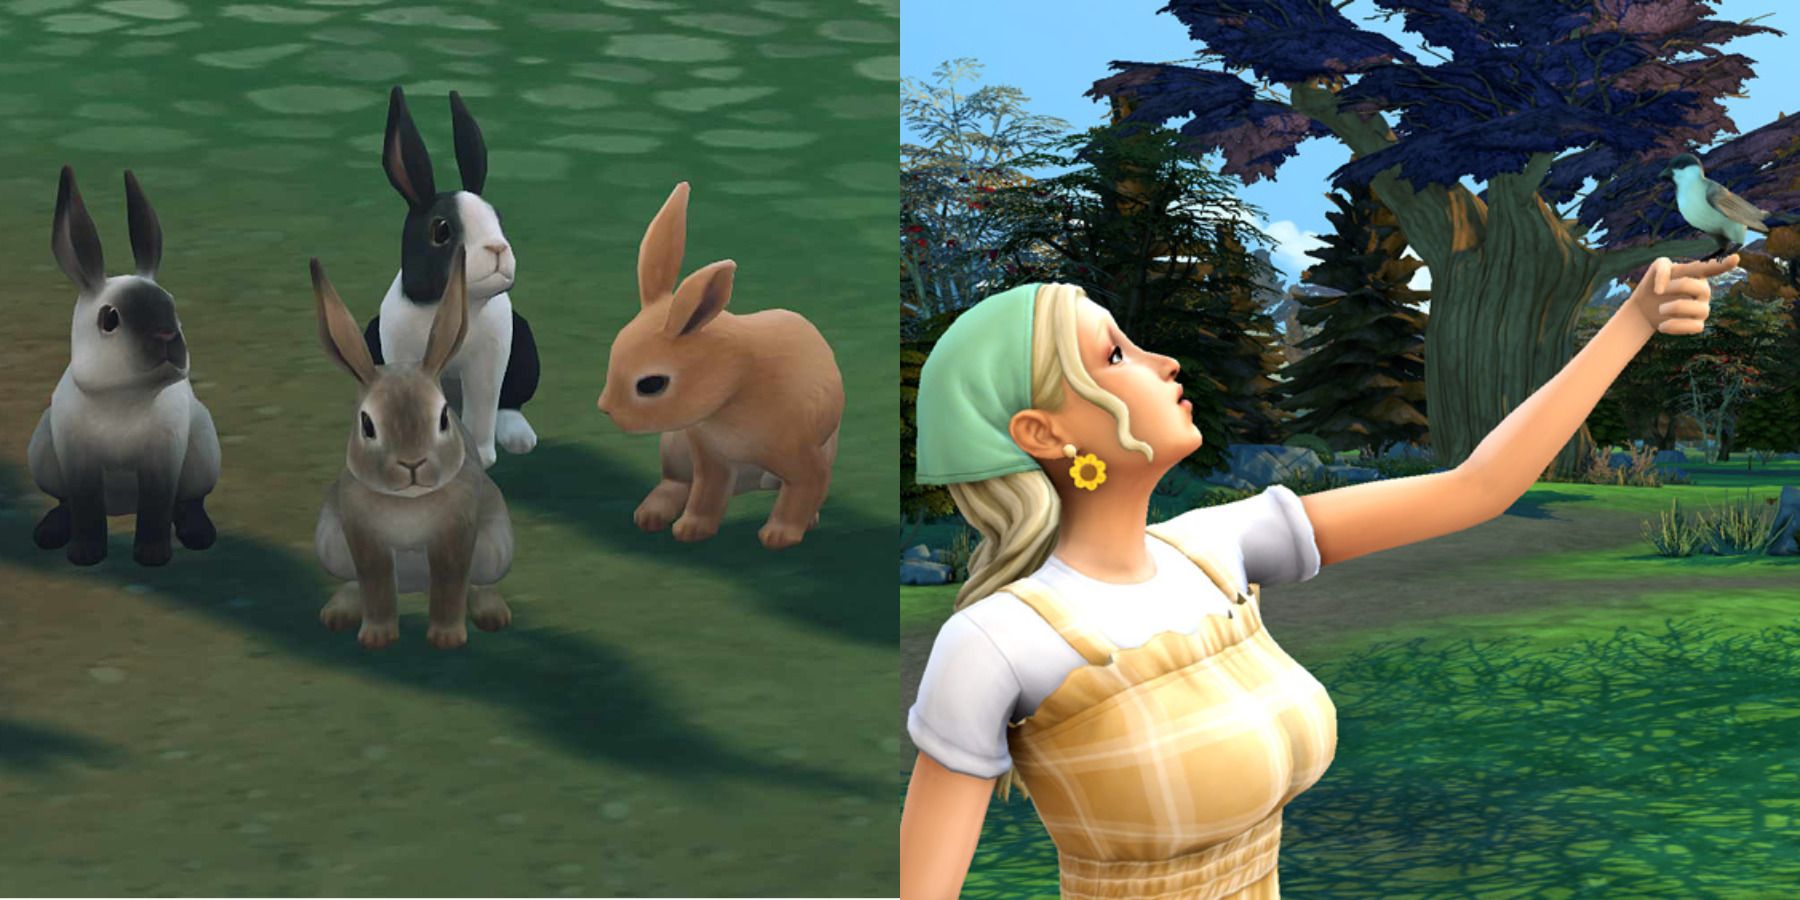 The Sims 4 birds and rabbits feature